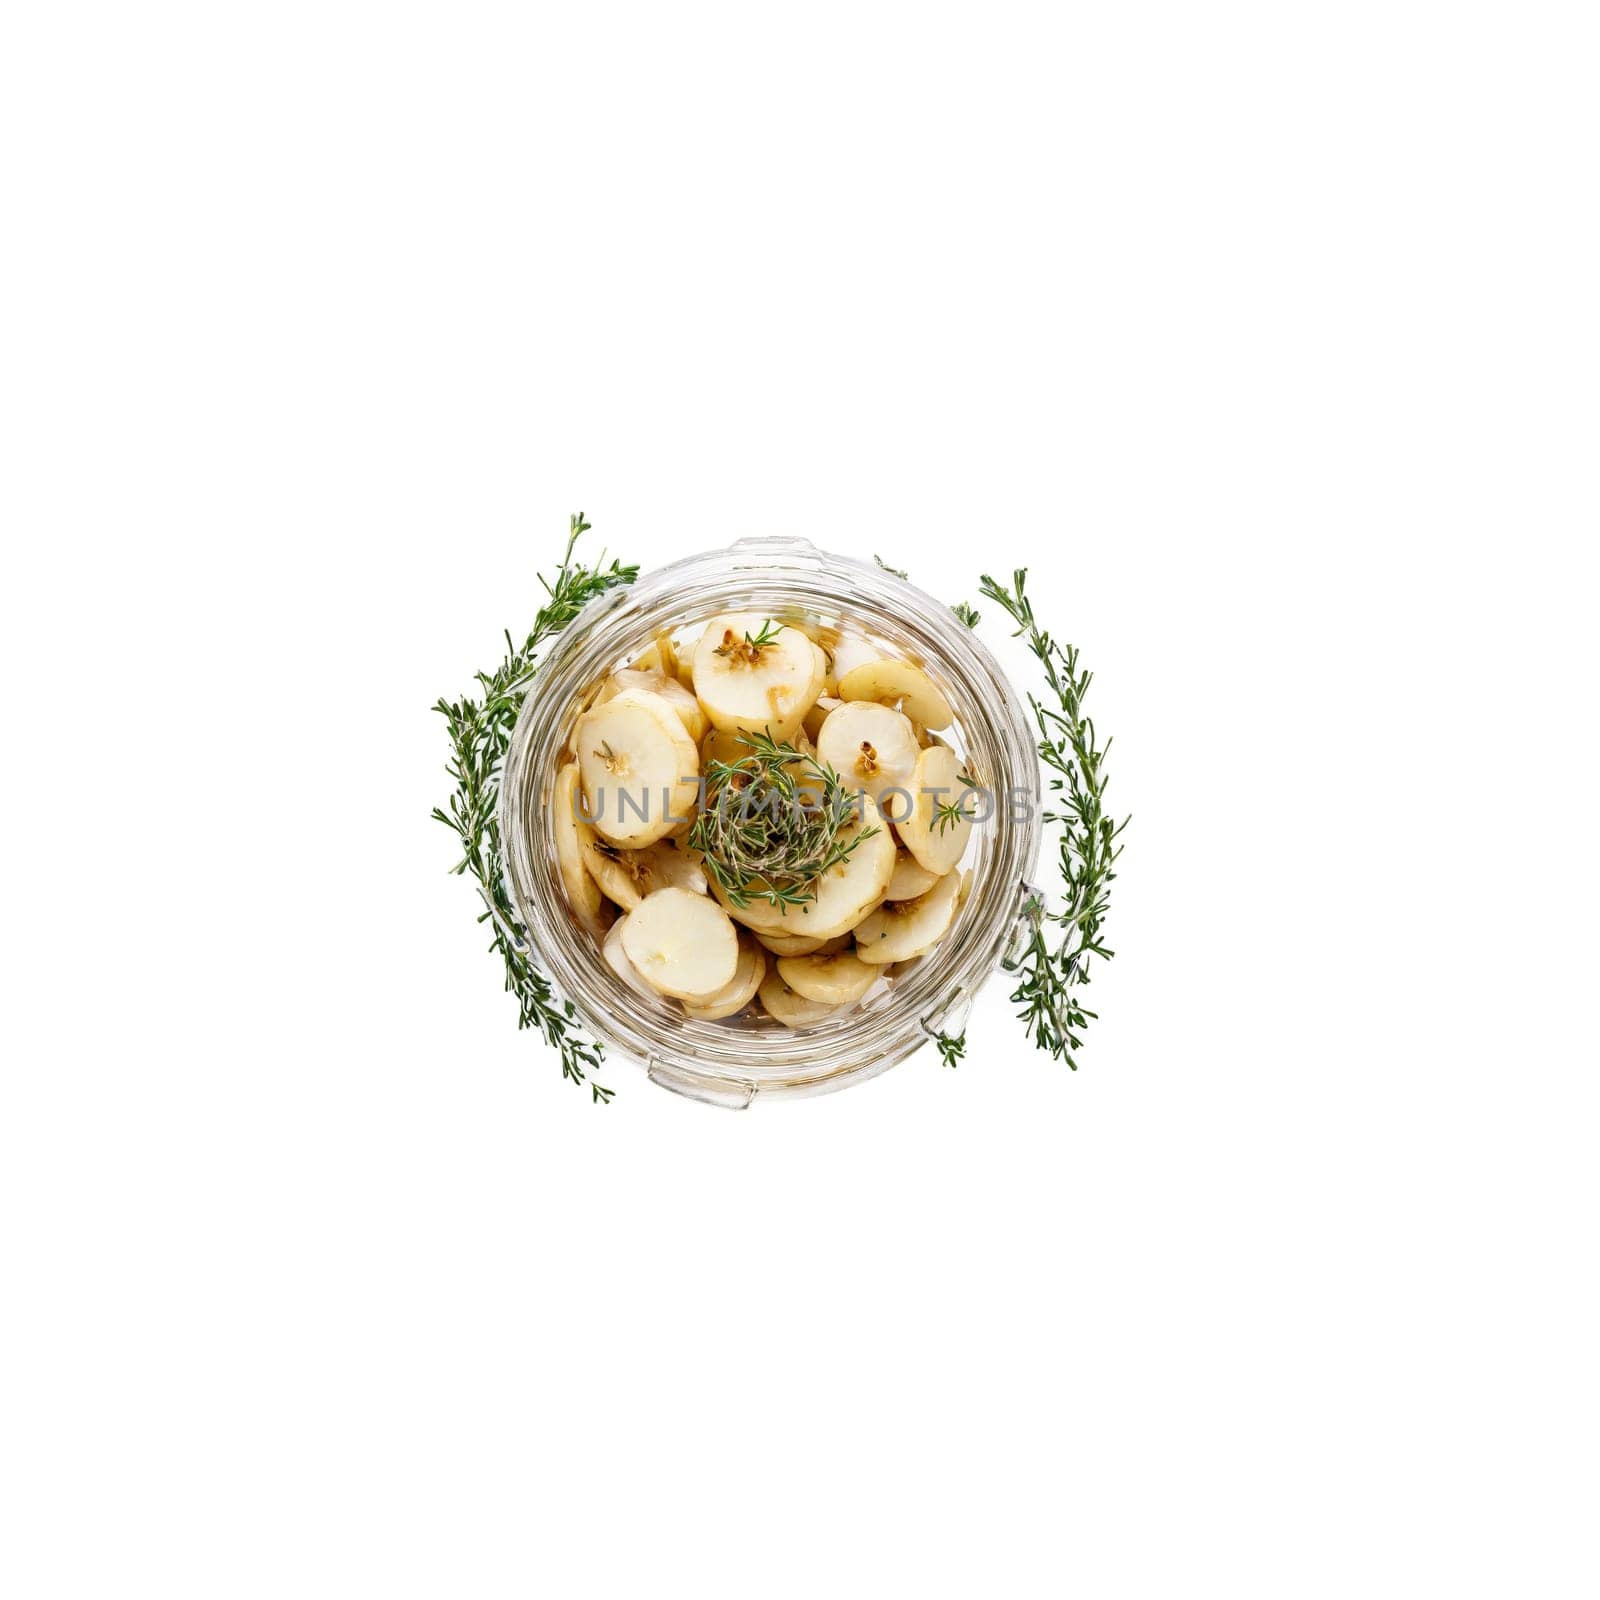 Pickled sunchokes crisp and earthy fanning out of a jar with thyme sprigs and garlic. Food isolated on transparent background.